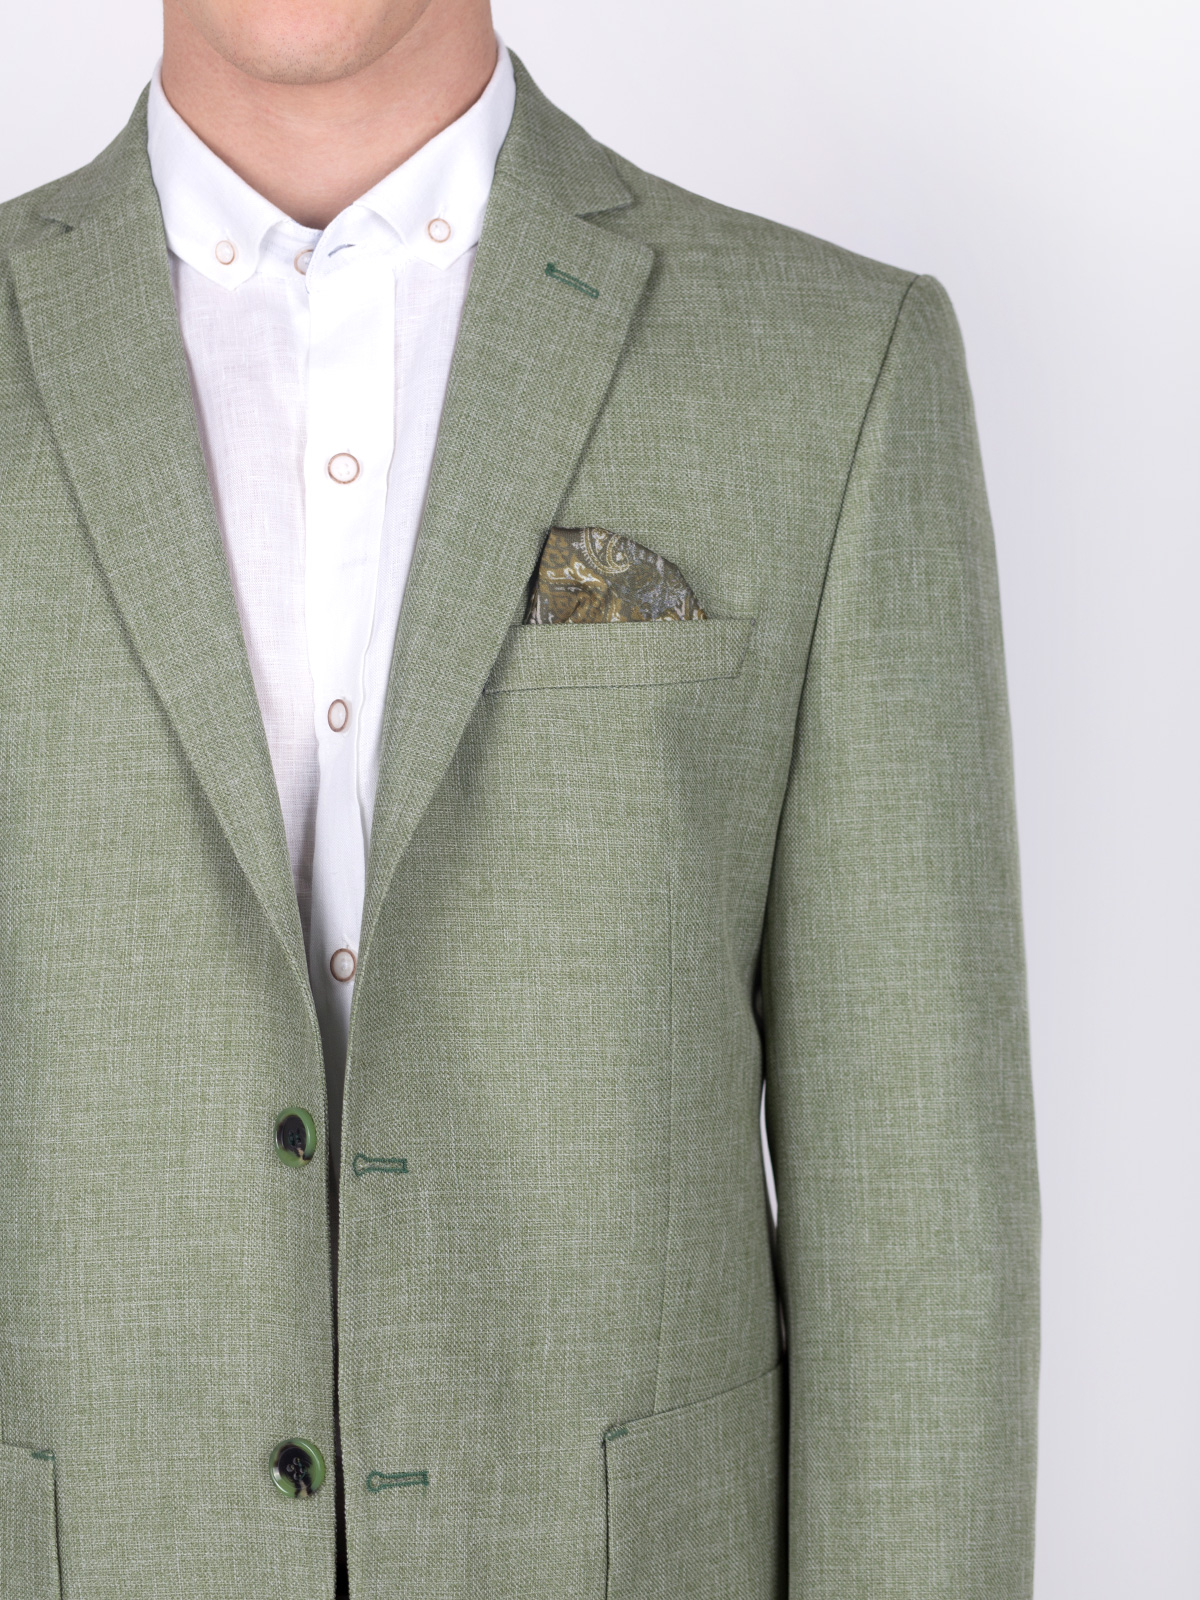 Green jacket made of linen and cotton - 64090 € 50.06 img5